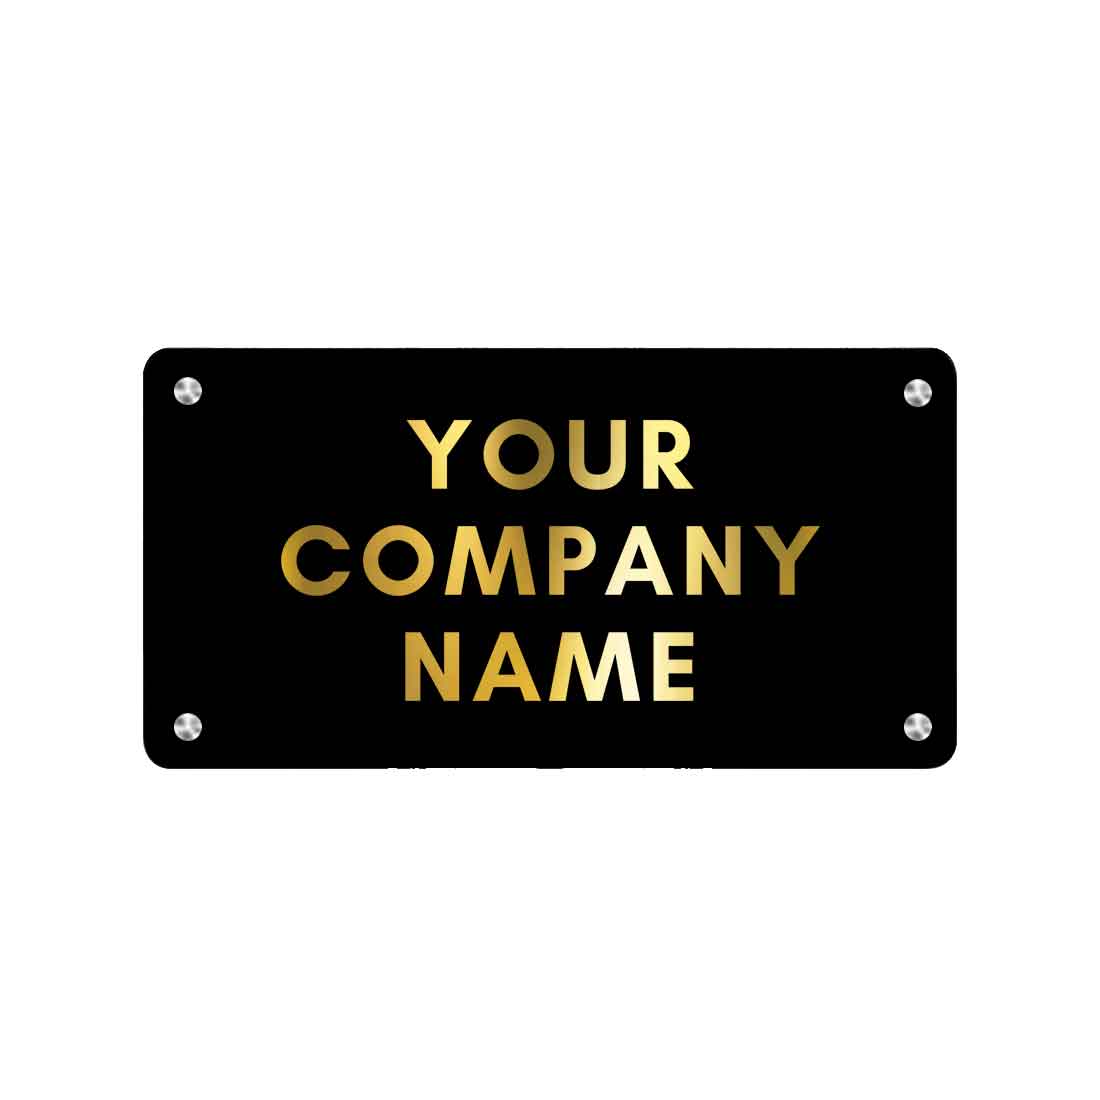 Personalized Stainless Steel Name Plates for Office Company Name Board - Add Name Logo